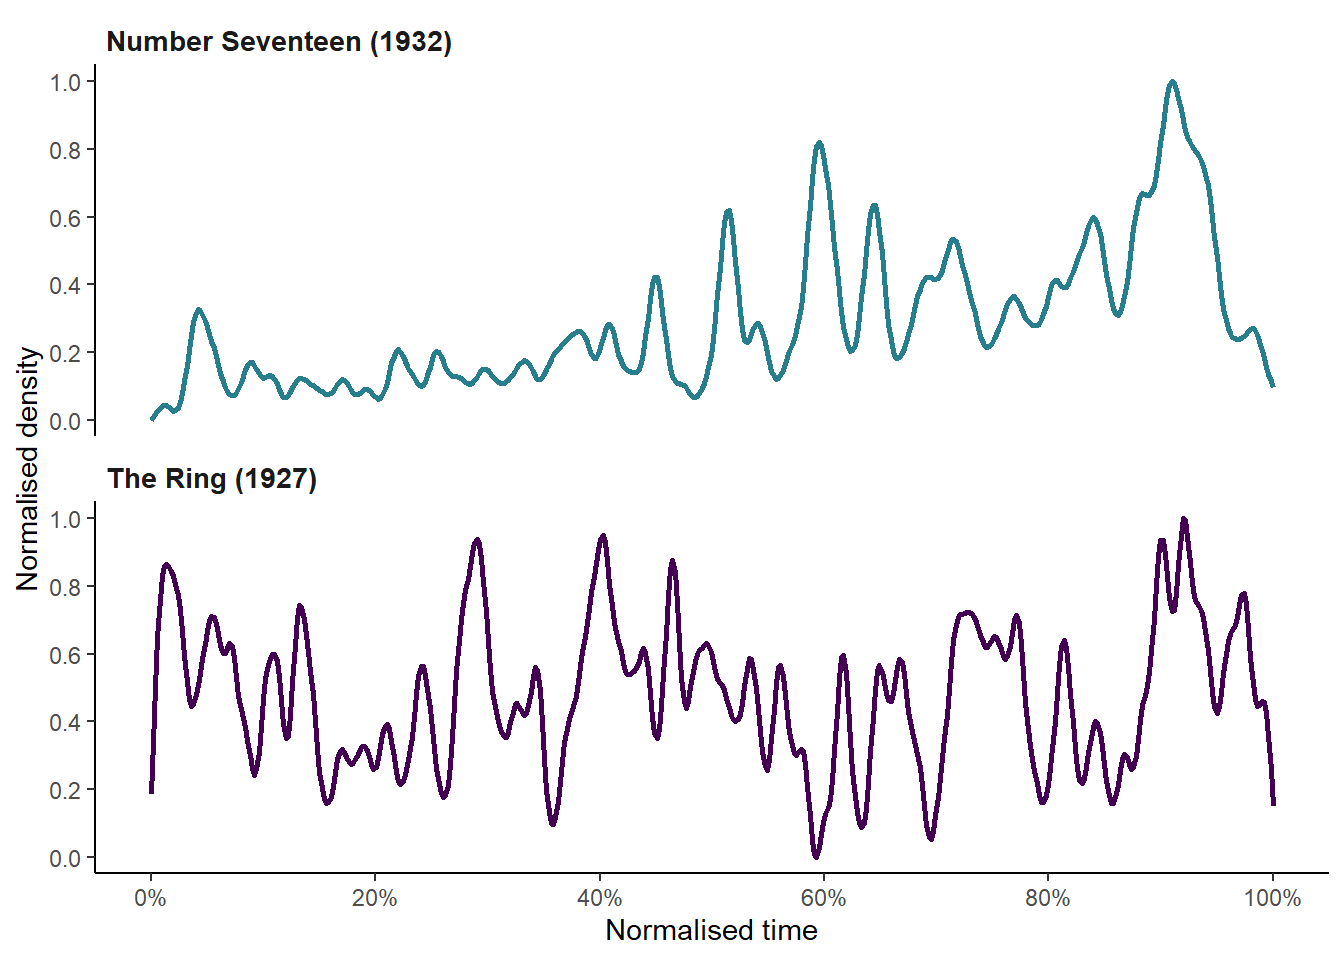 Comparing the cut densities of *Number Seventeen* (1932) and *The Ring* (1927).